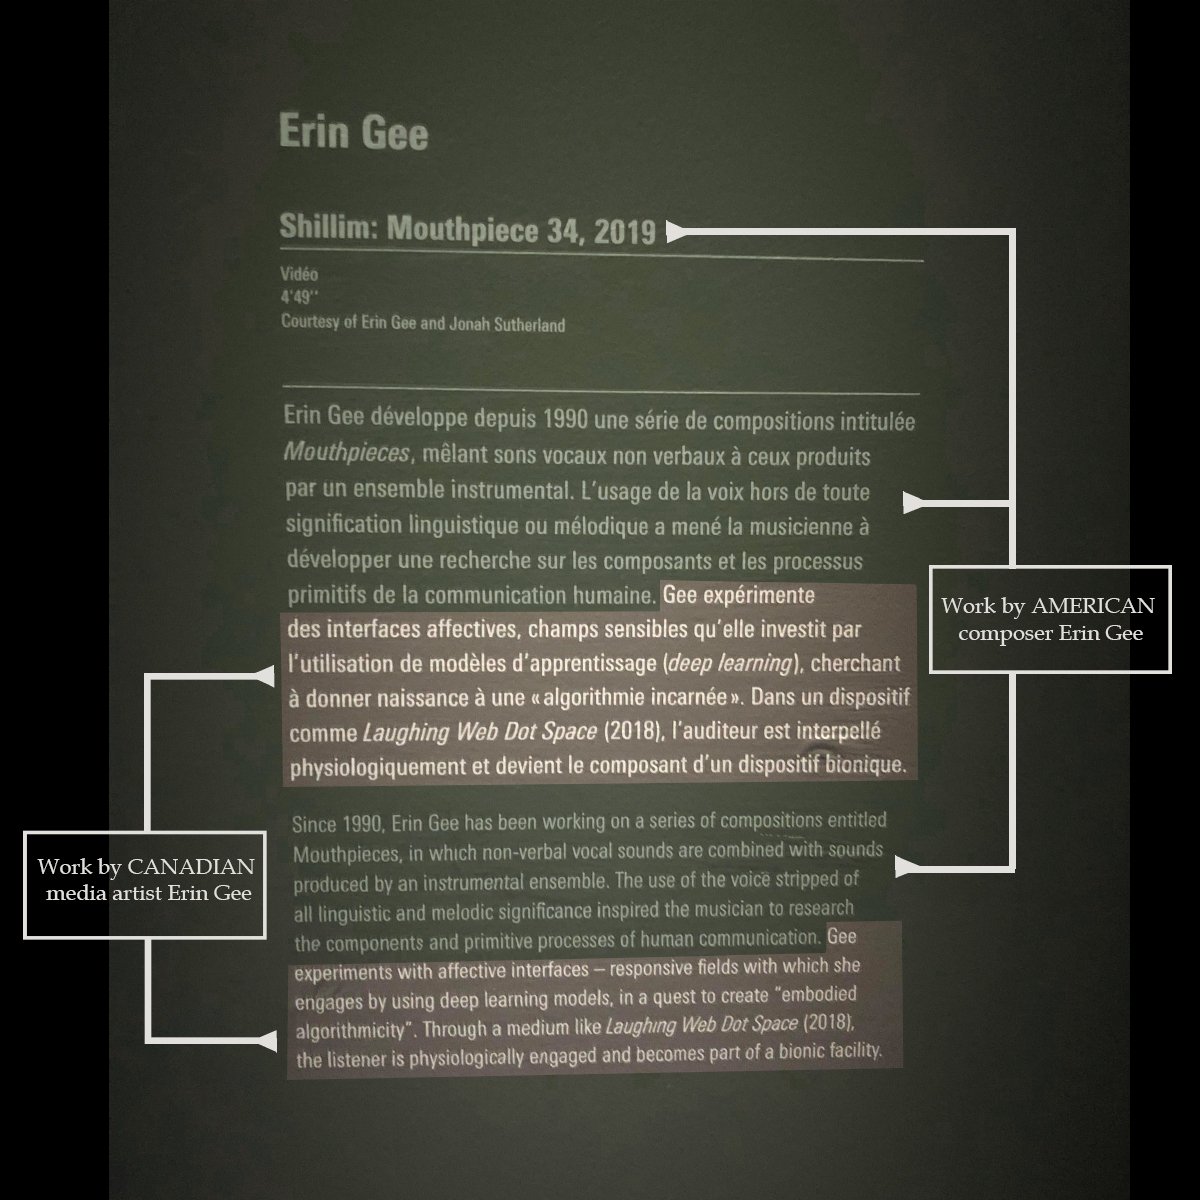 A photo of original wall text from Neurones exhibition at Centre Pompidou combining the works and research of Canadian Artist Erin Gee with American Composer Erin Gee.